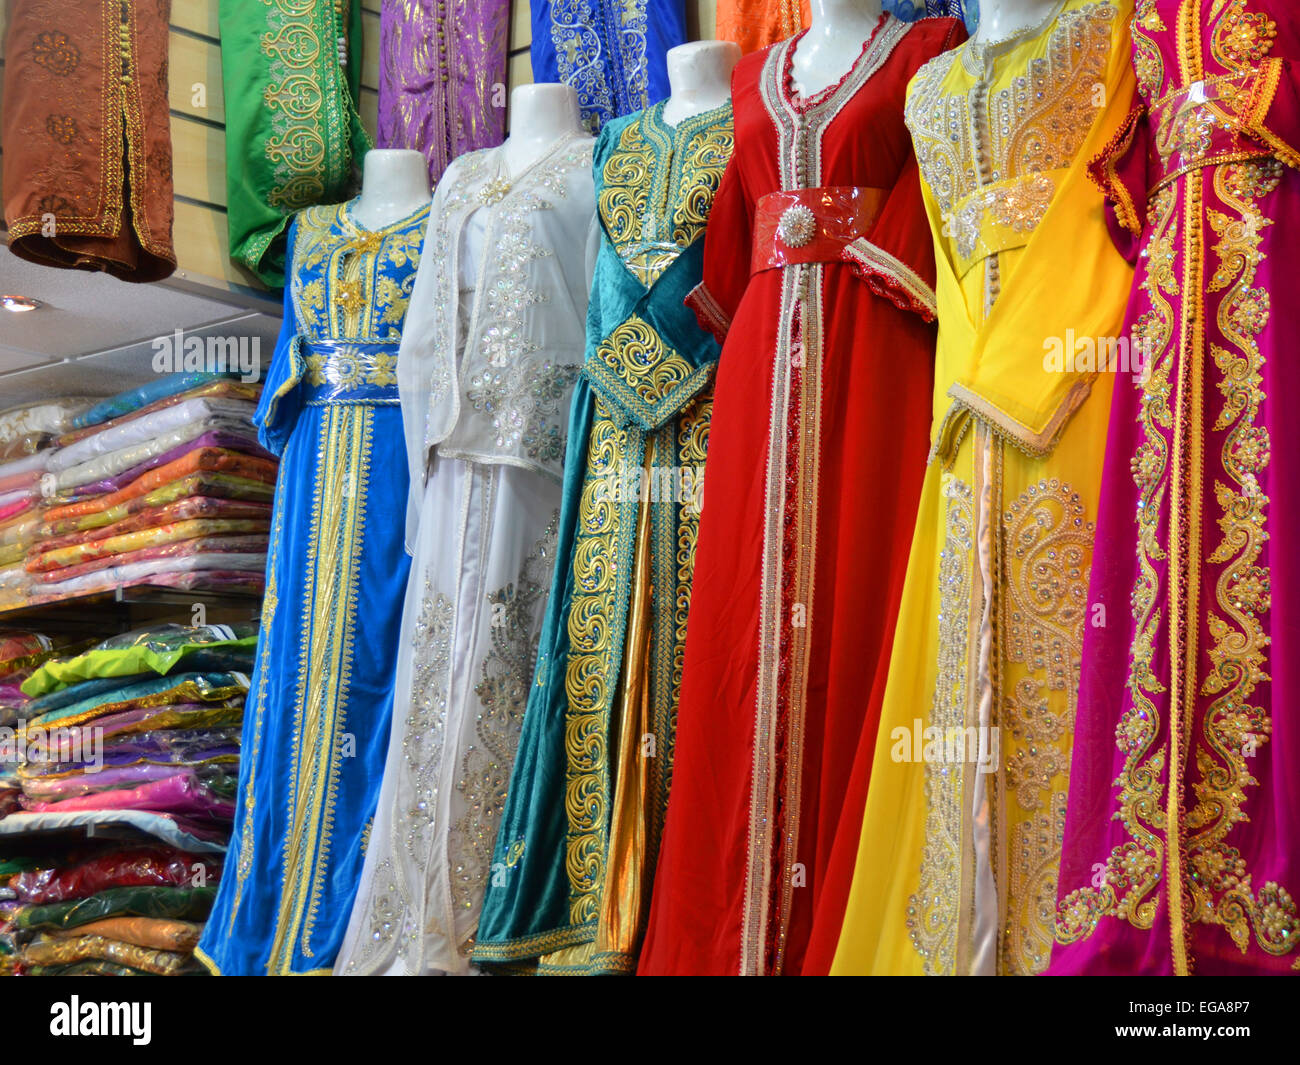 Colourful long dresses for sale, Marrakech, Morocco Stock Photo - Alamy